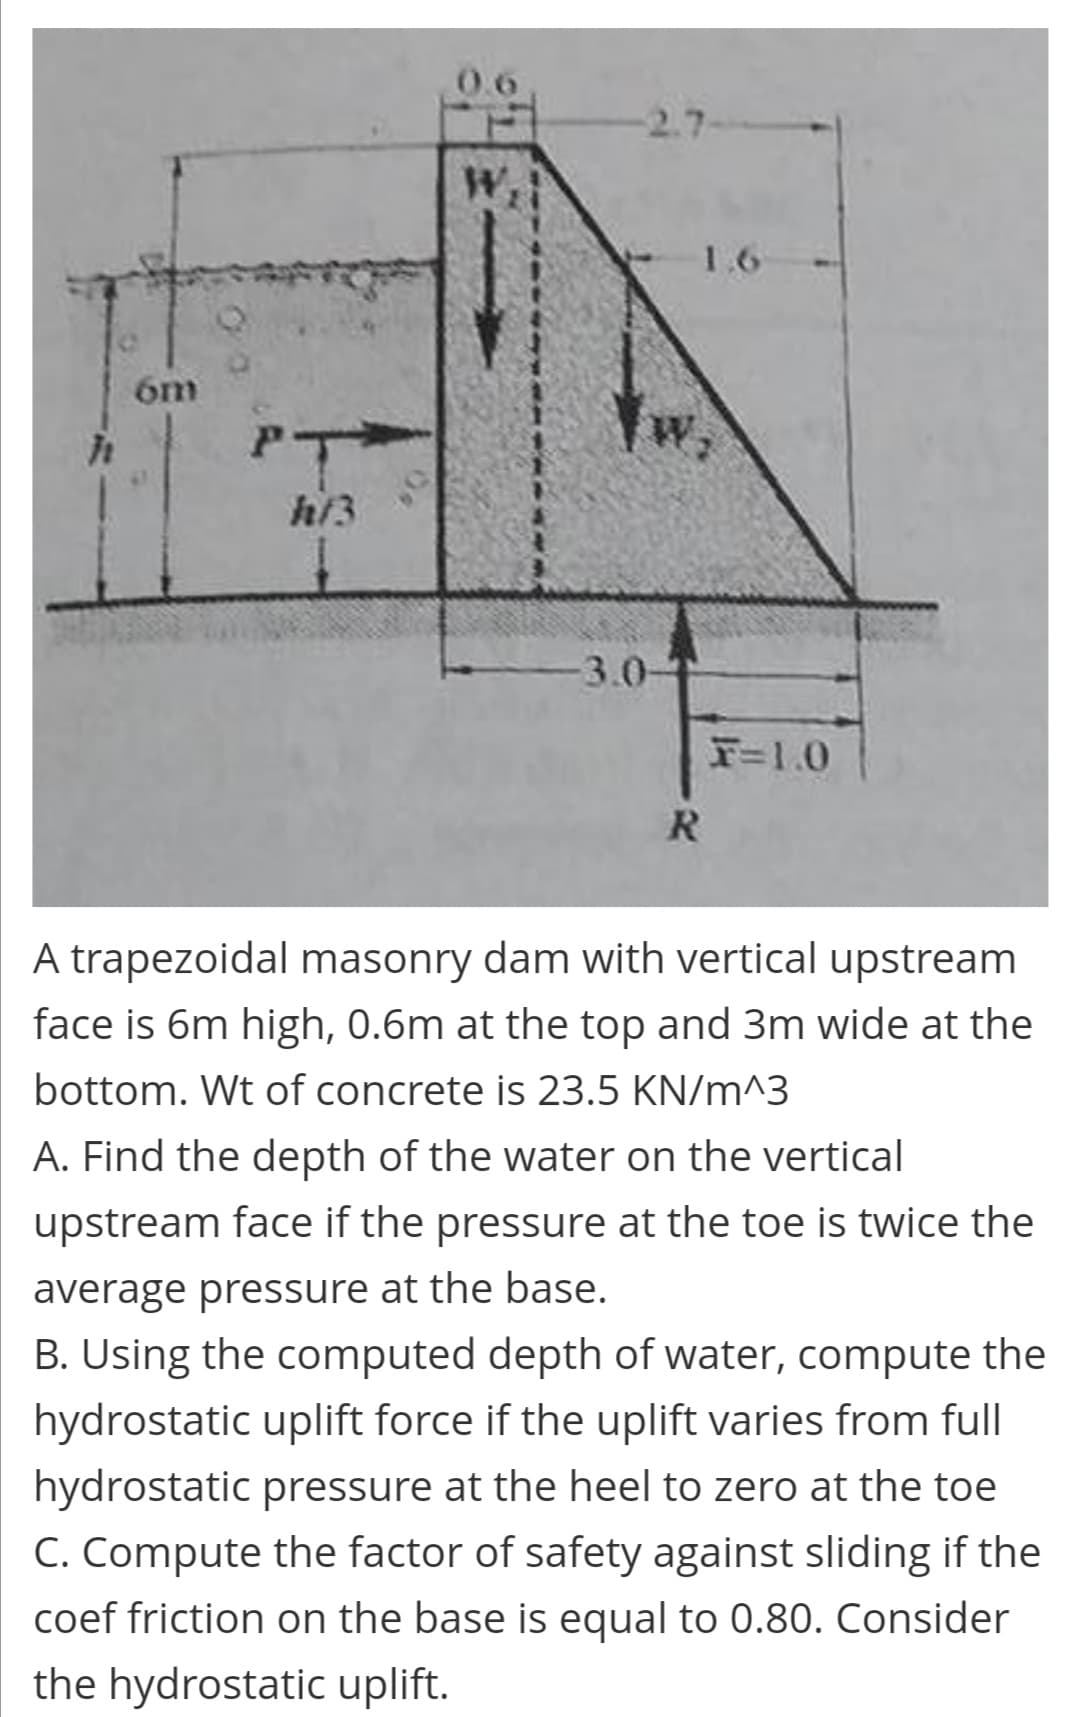 0.6
2.7
W,
1.6
6m
h/3
3.0-T
F=1.0
R
A trapezoidal masonry dam with vertical upstream
face is 6m high, 0.6m at the top and 3m wide at the
bottom. Wt of concrete is 23.5 KN/m^3
A. Find the depth of the water on the vertical
upstream face if the pressure at the toe is twice the
average pressure at the base.
B. Using the computed depth of water, compute the
hydrostatic uplift force if the uplift varies from full
hydrostatic pressure at the heel to zero at the toe
C. Compute the factor of safety against sliding if the
coef friction on the base is equal to 0.80. Consider
the hydrostatic uplift.
